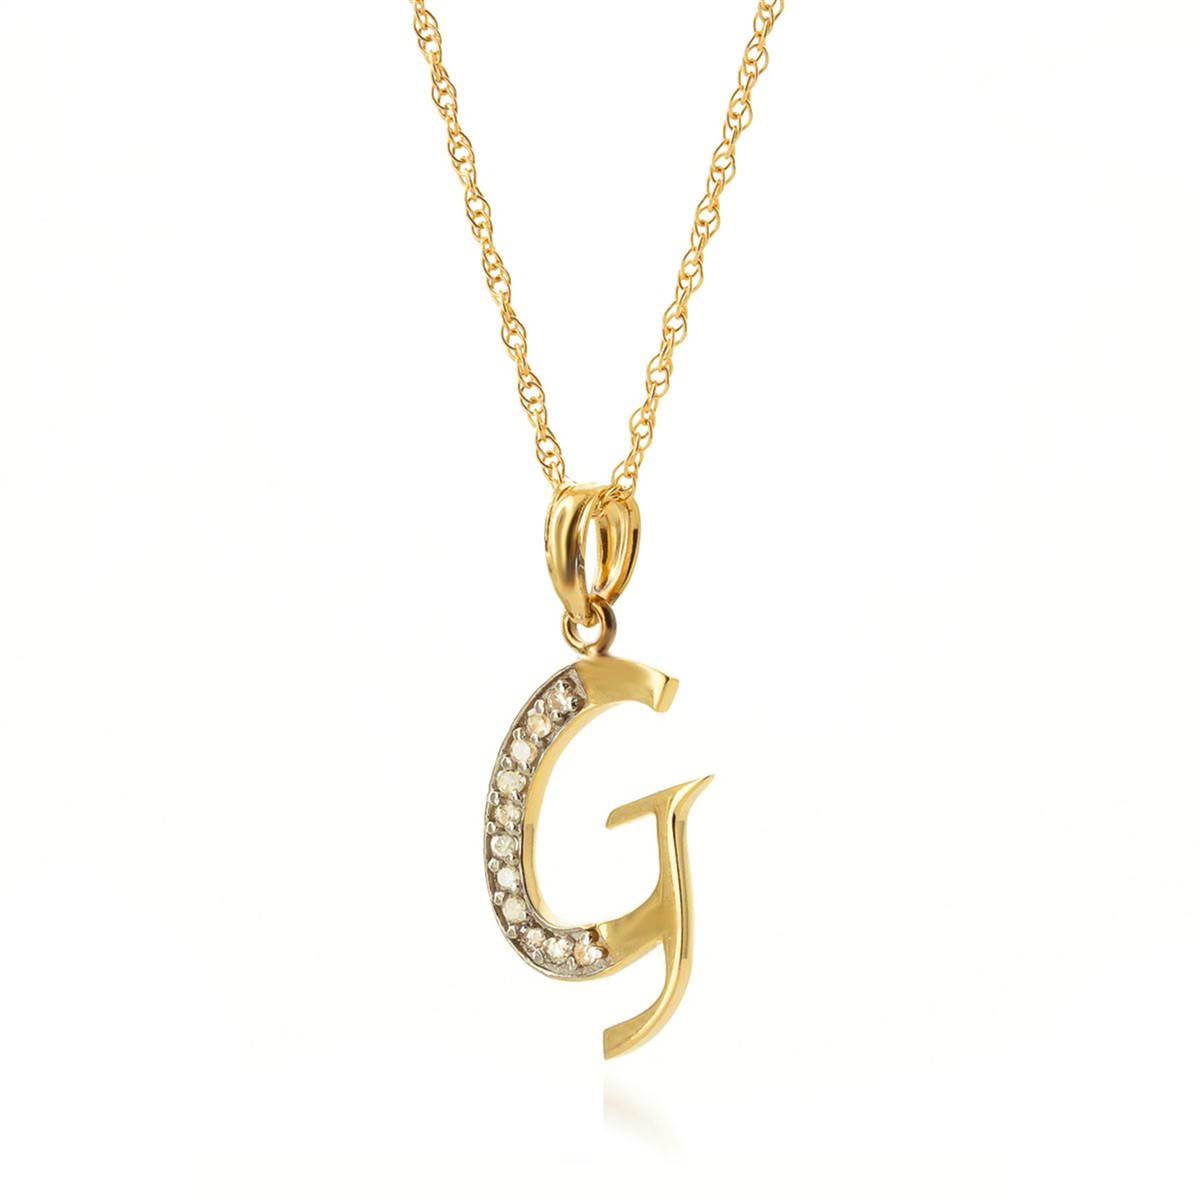 14K Solid Yellow Gold Necklace w/ Natural Diamonds Initial 'g' Pendant